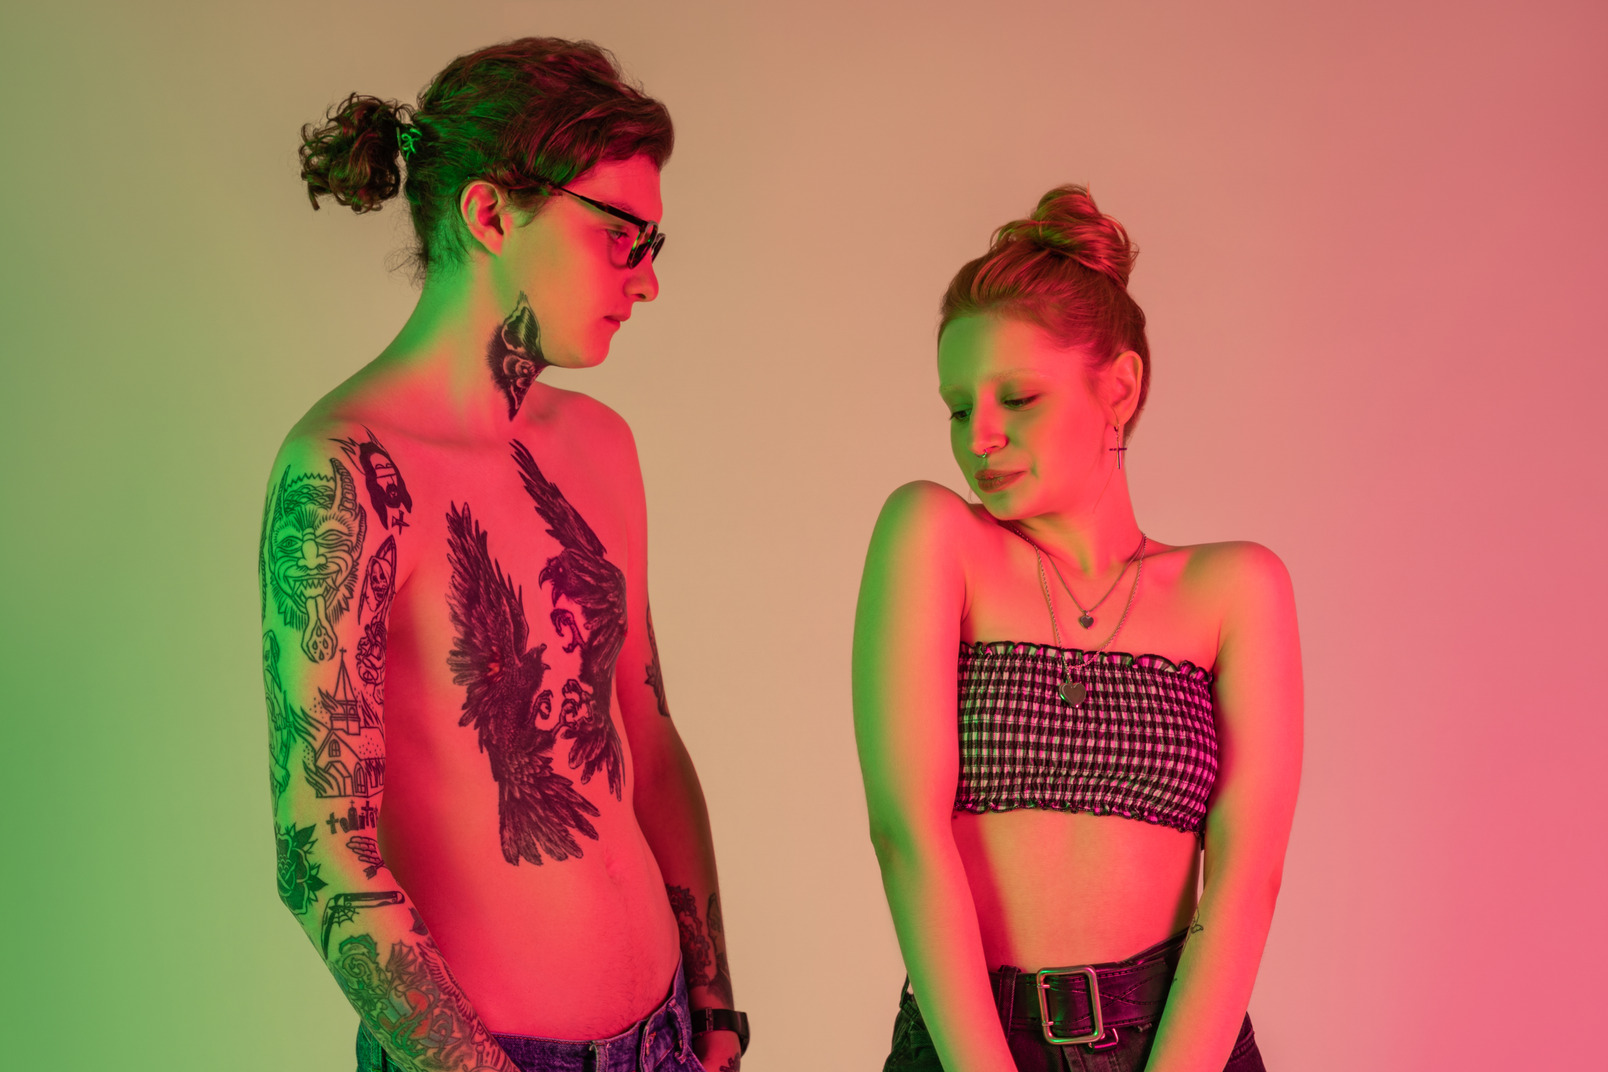 Teen couple in light clothes among green and pink neon